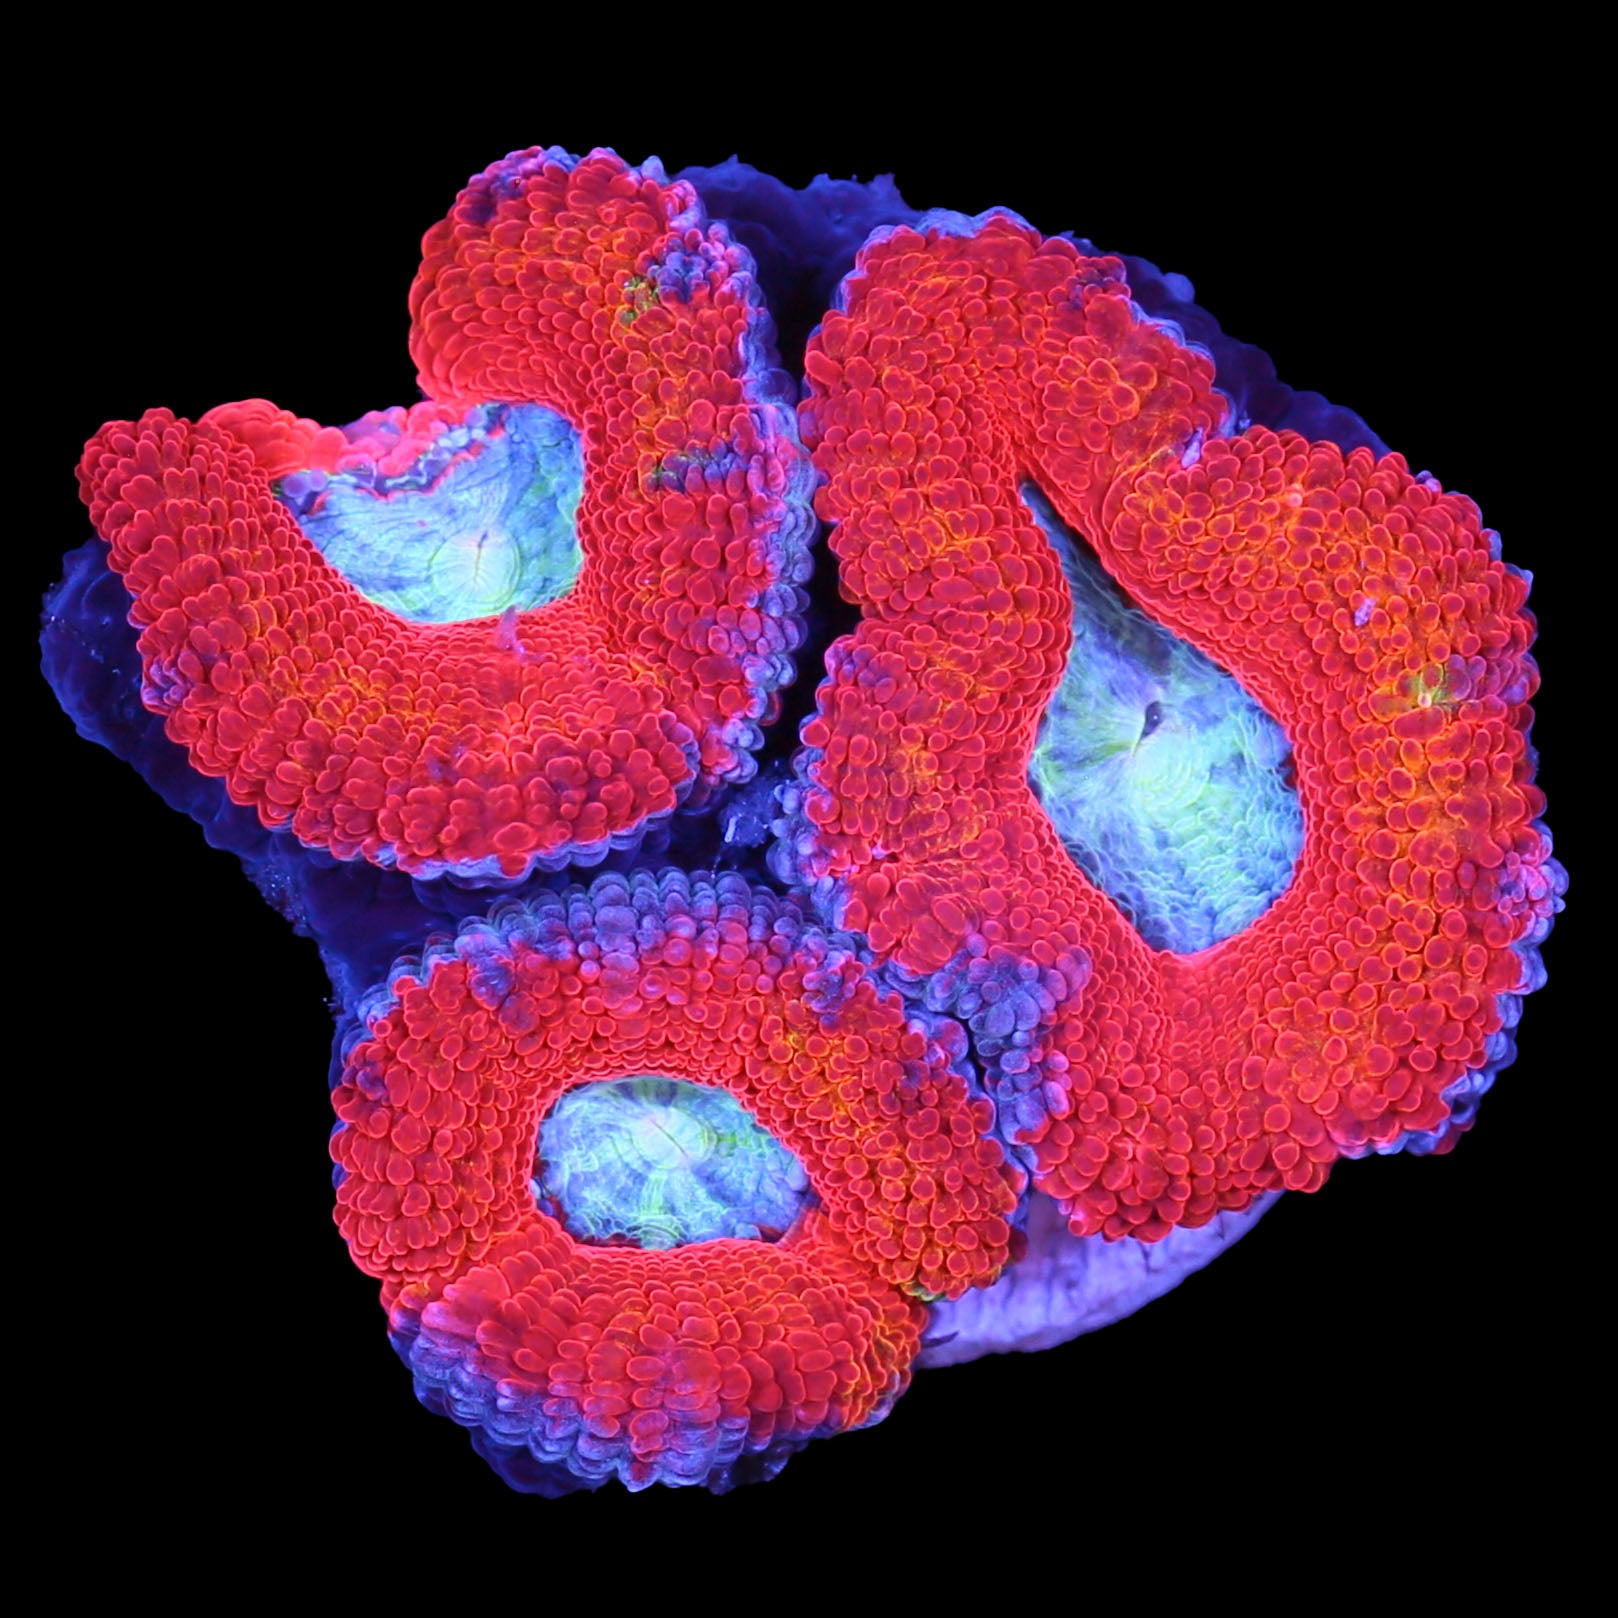 Vivid's Eye of the Tiger Acan Coral - New Release